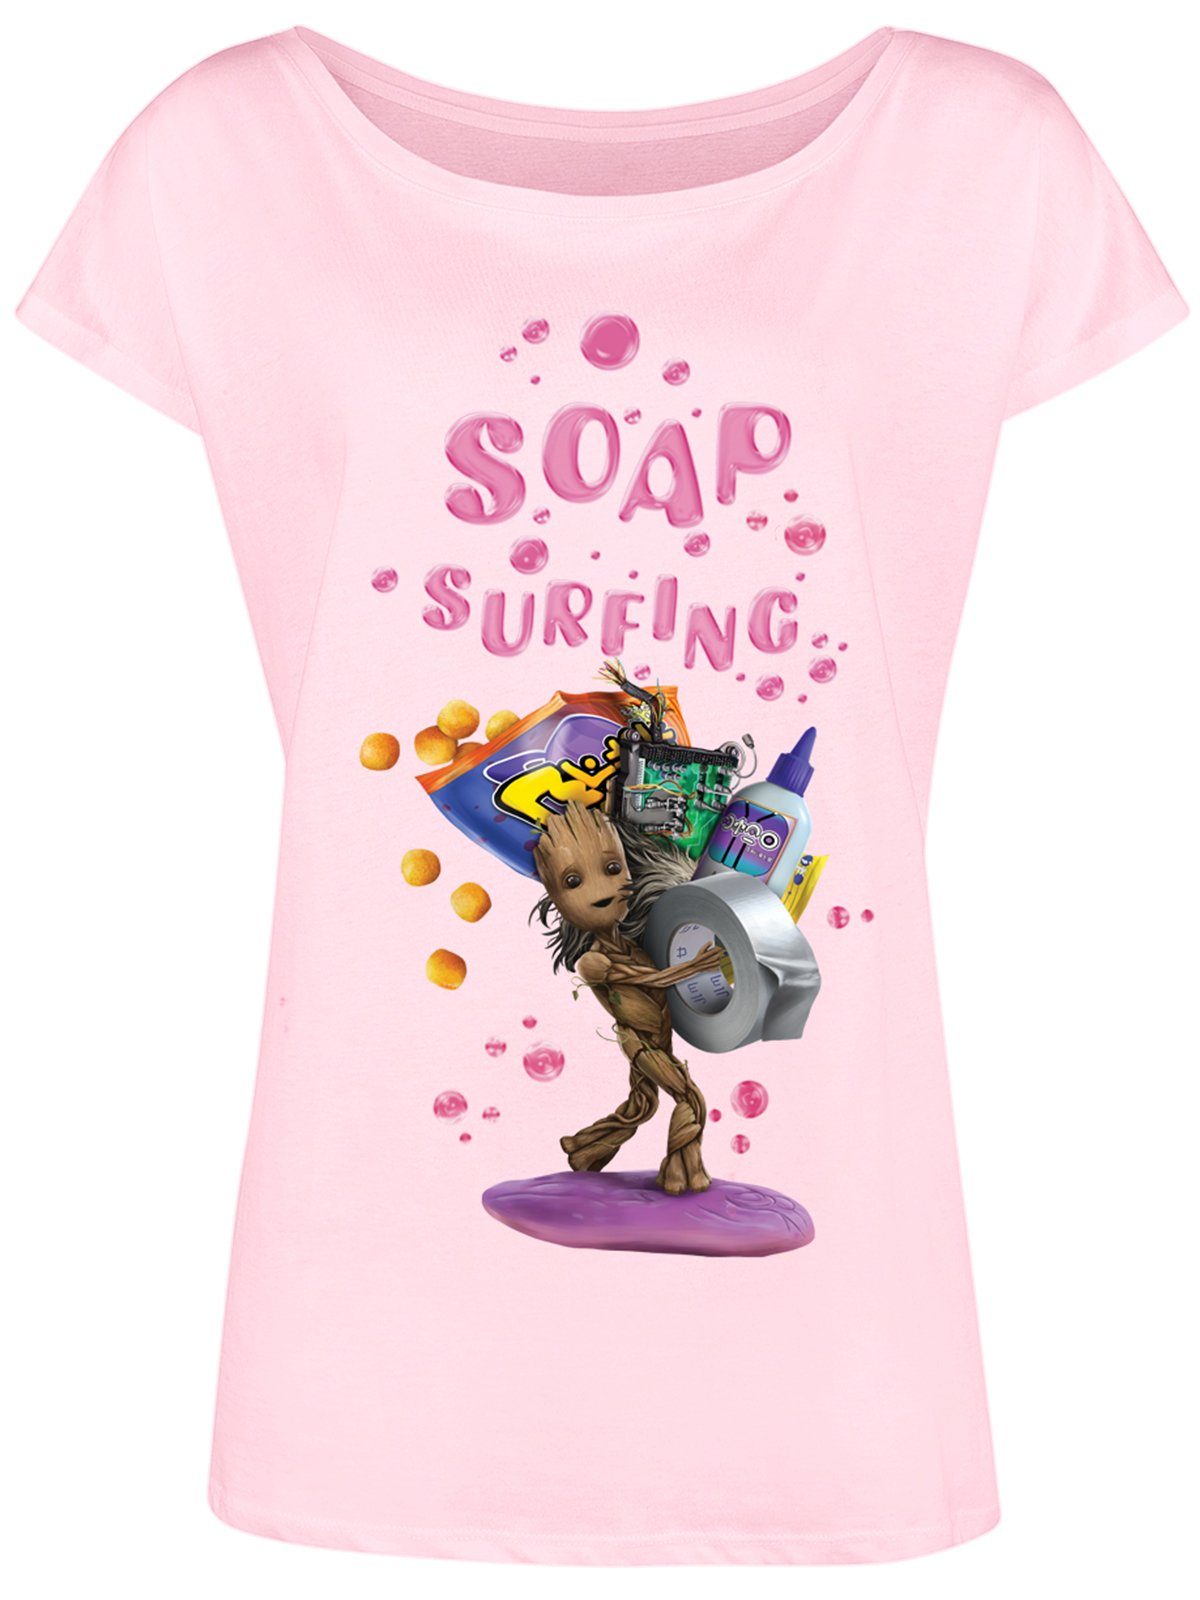 Serving of T-Shirt the Soap Guardians Galaxy MARVEL